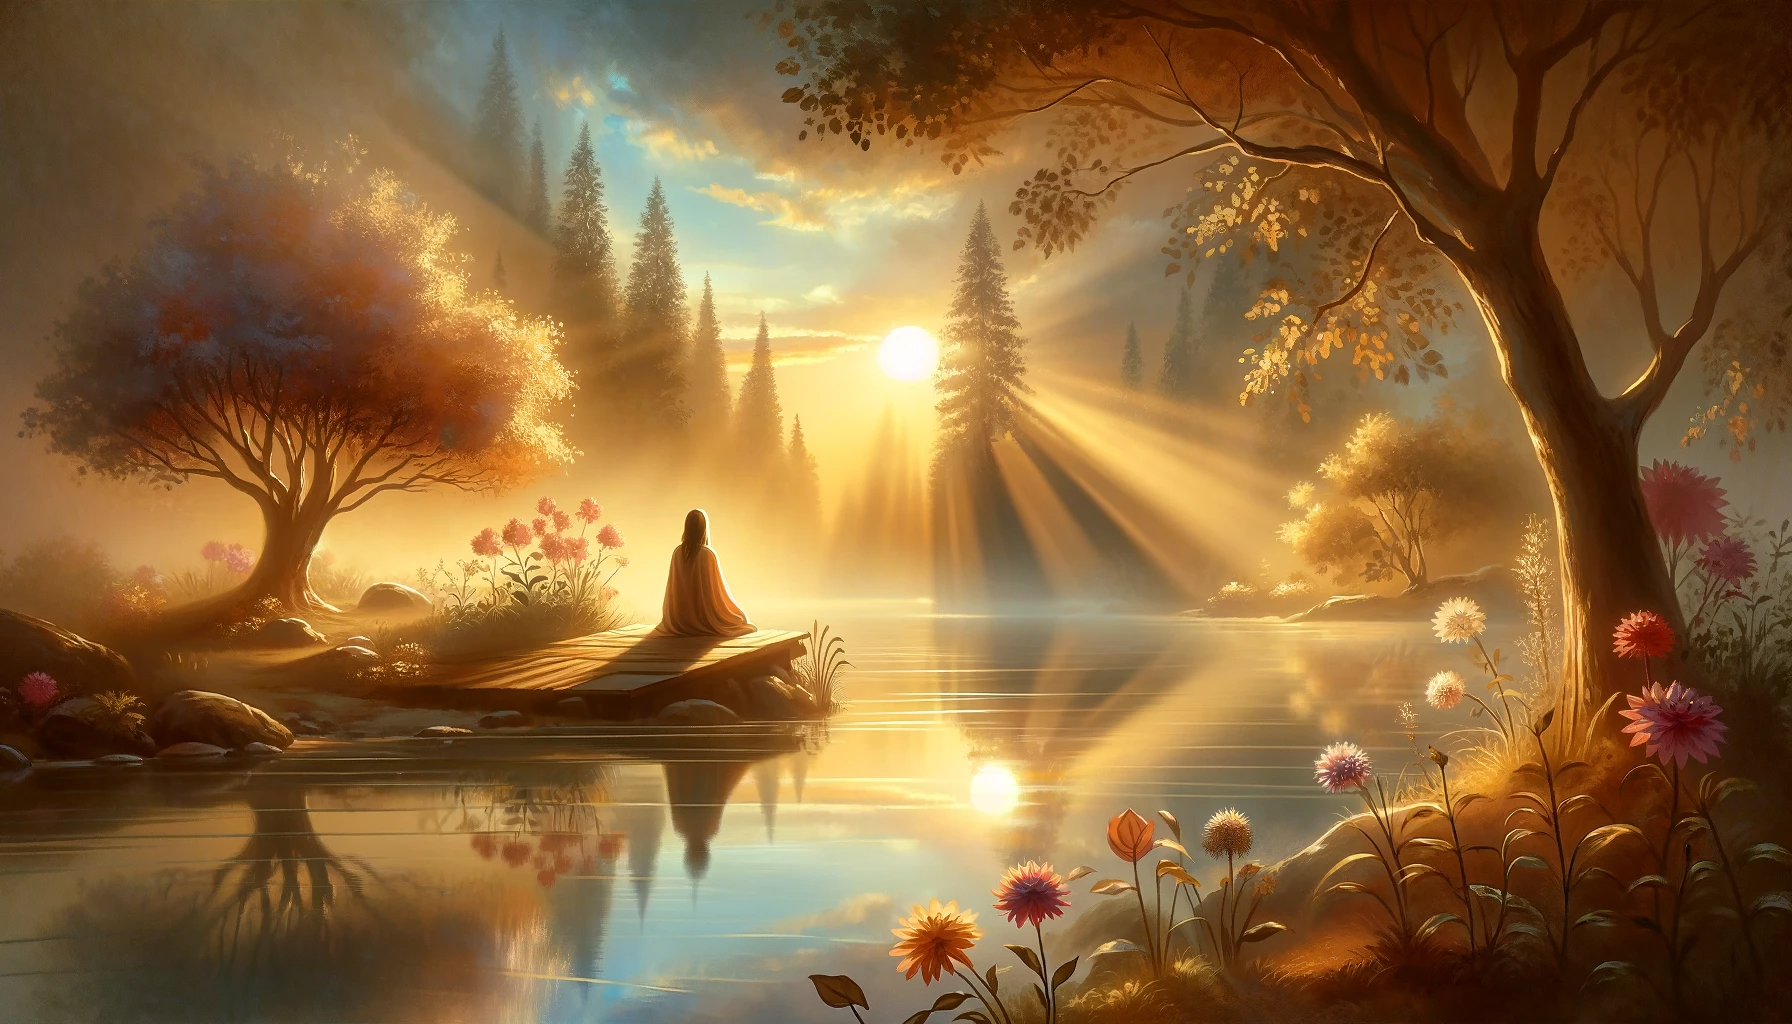 An image that illustrates the concept of a gradual spiritual awakening in recovery. The scene should depict a tranquil and inspiring environment, perh